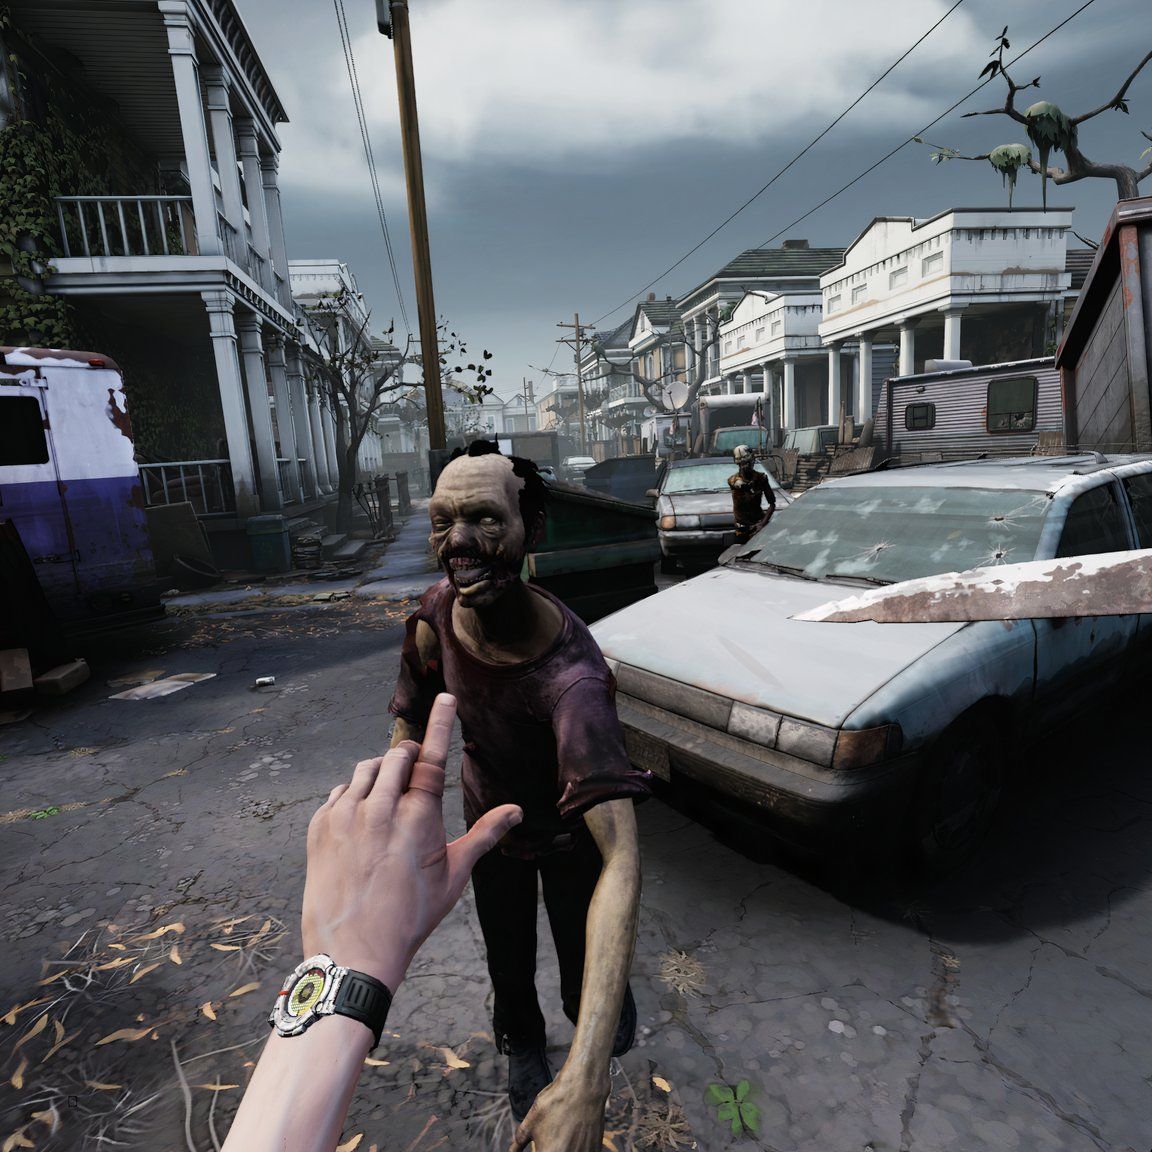 A first-person perspective of someone wielding a knife against a rapidly approaching zombie.